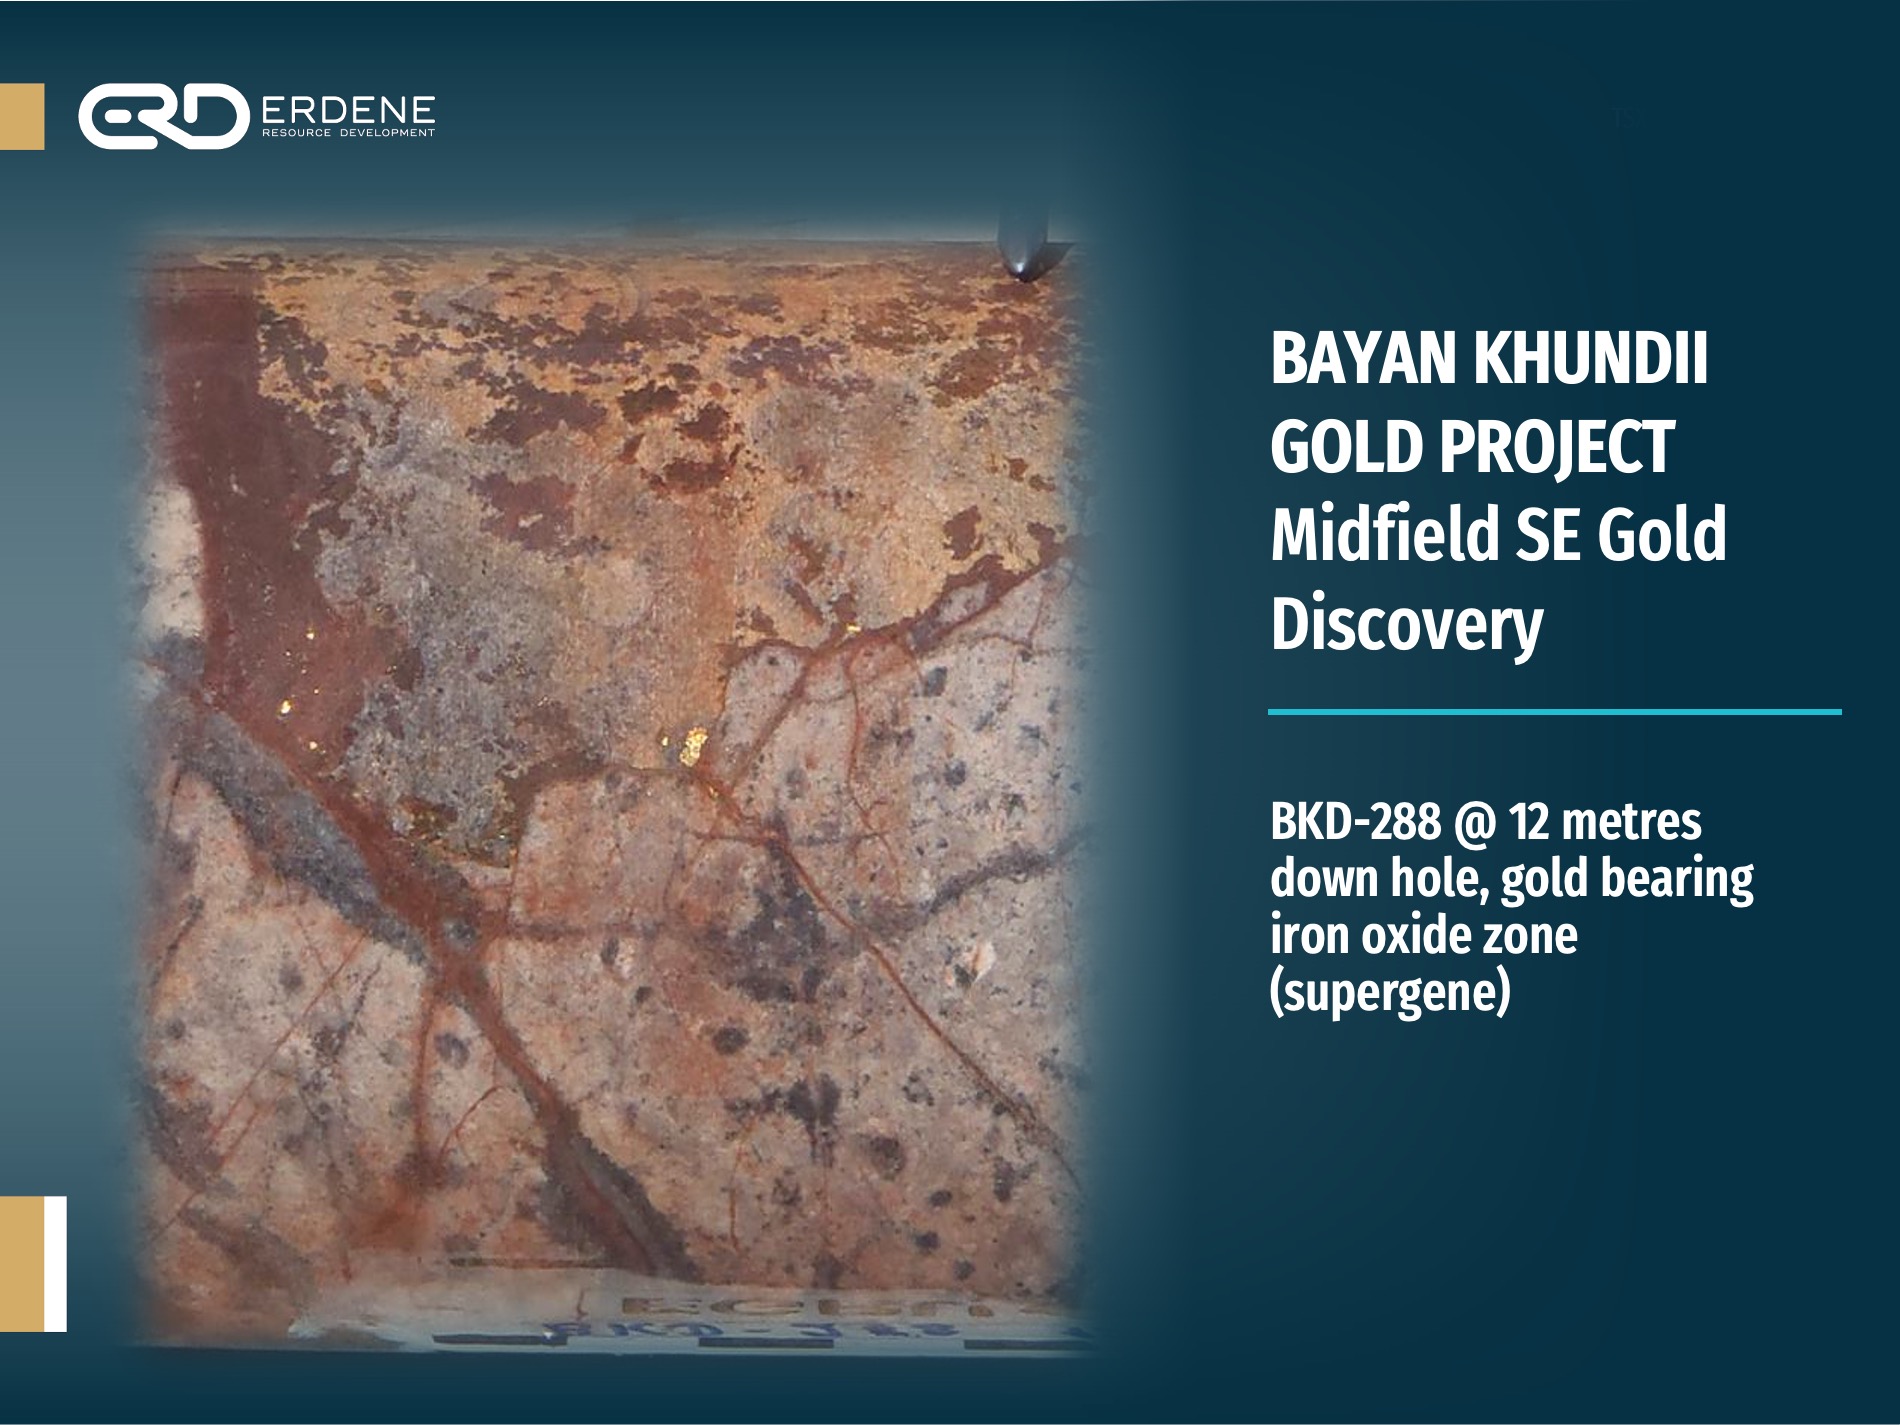 2. Bayan Khundii Gold Project - Midfield SE Gold Discovery